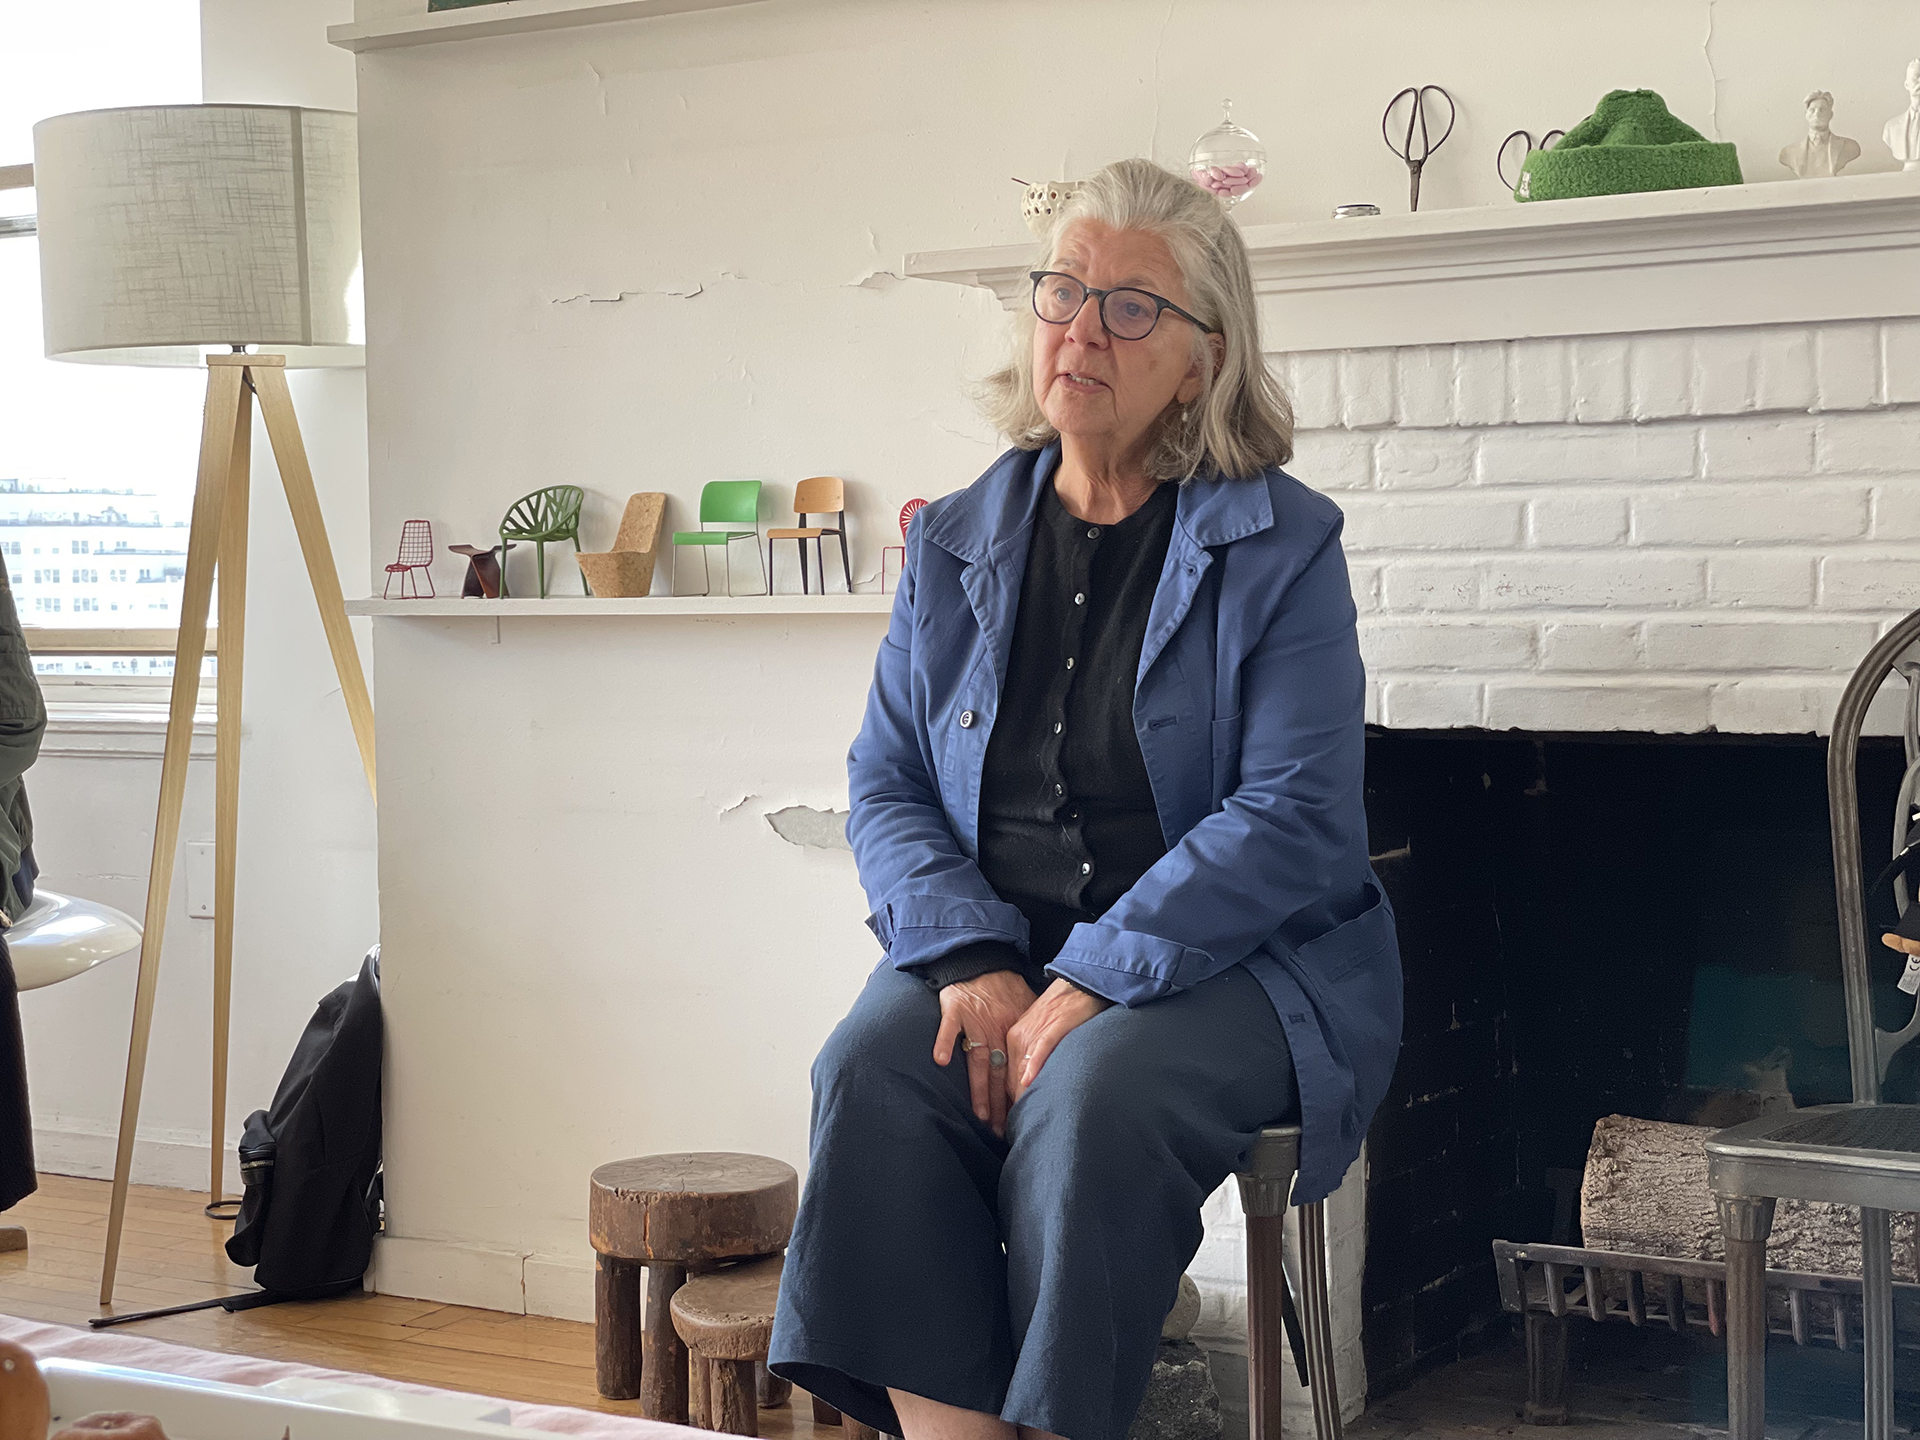 Students in discussion with Maira Kalman at her studio